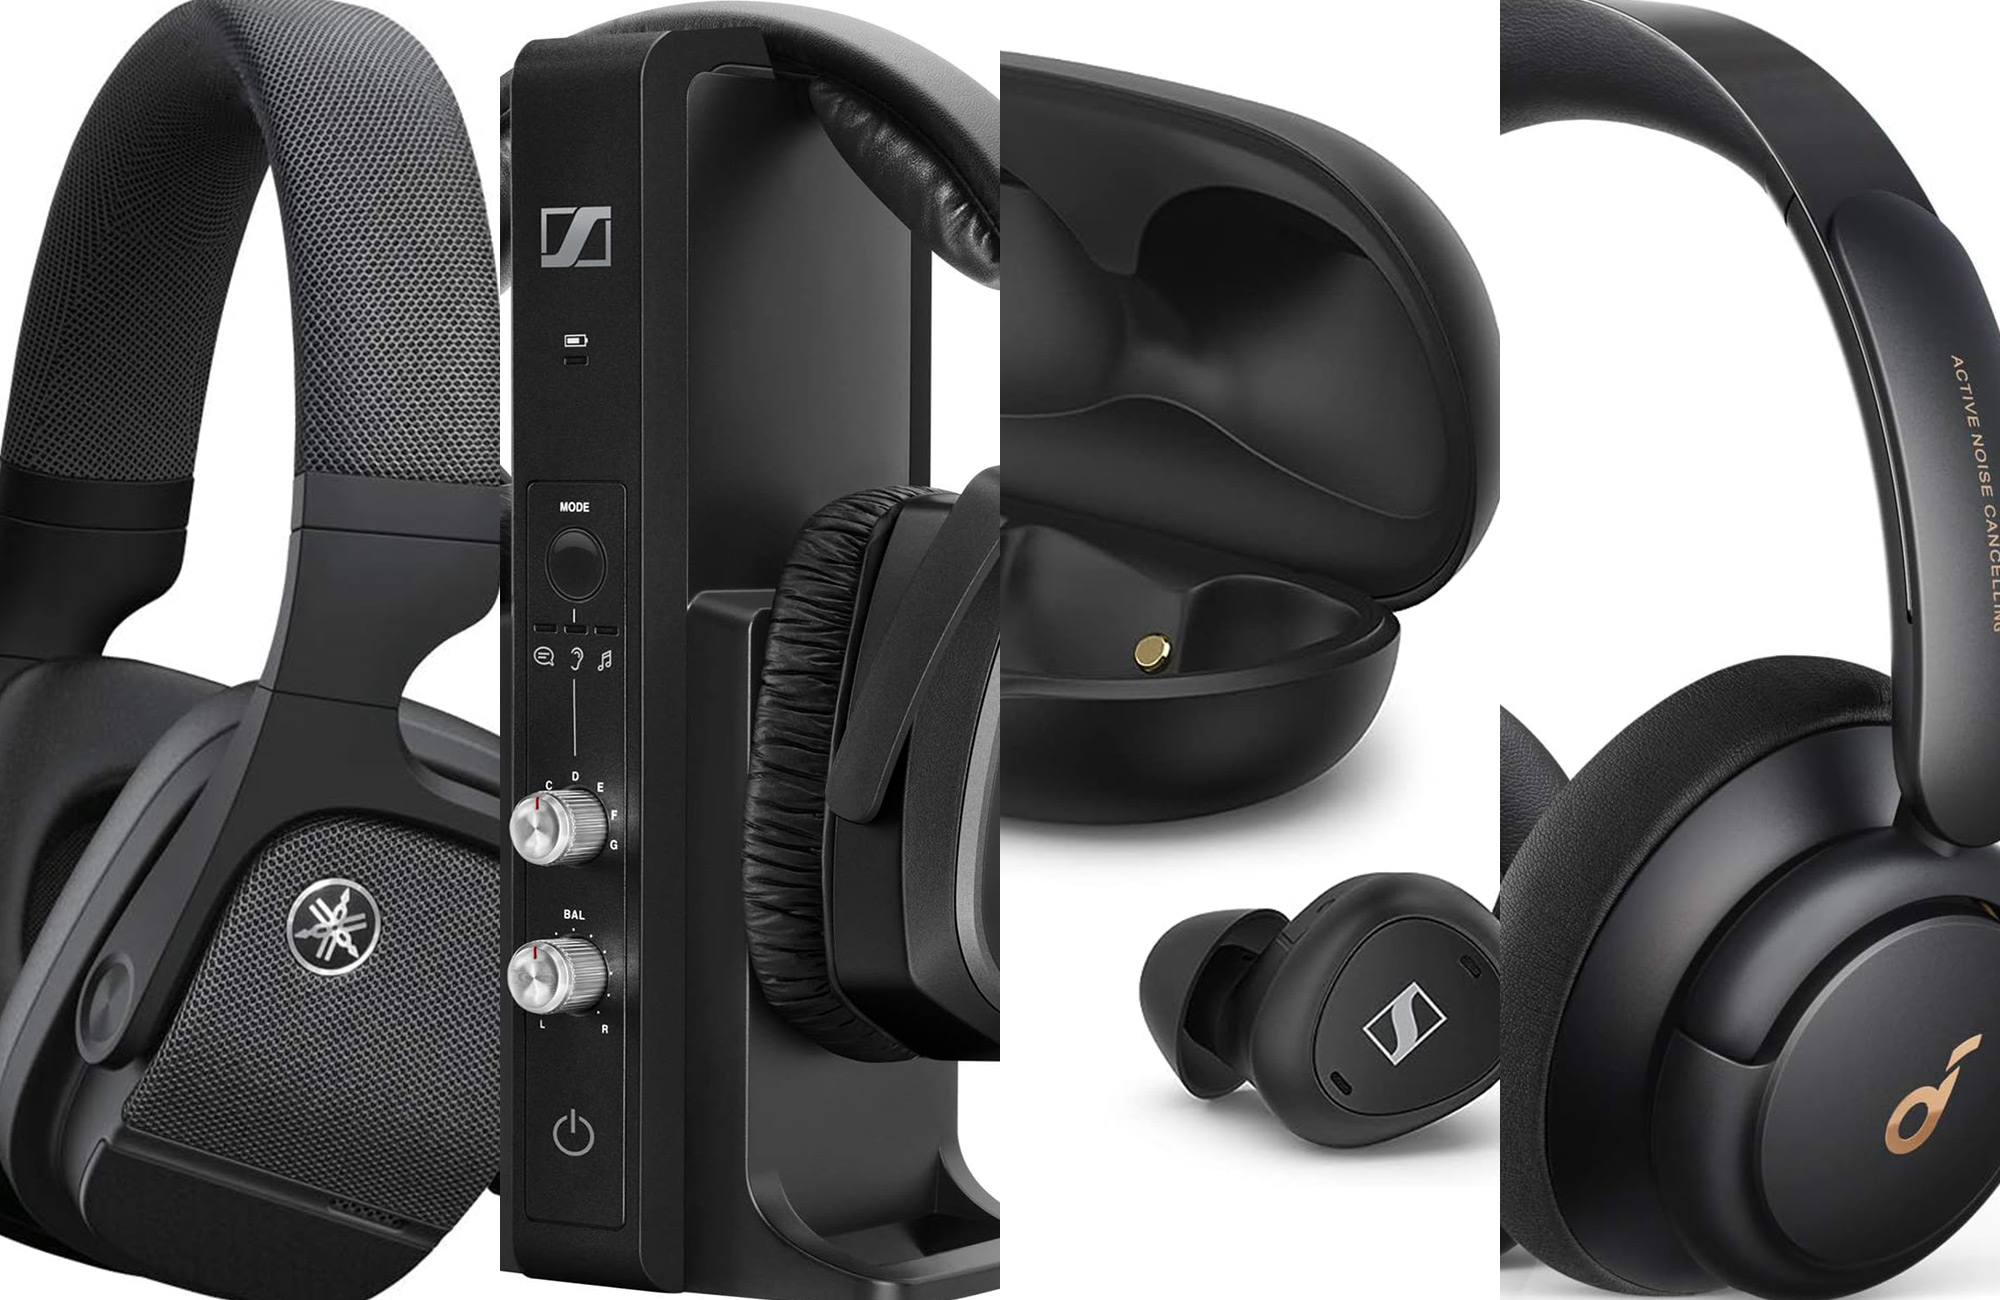 Soundcore Life Q30 review: solid wireless ANC headphones for less